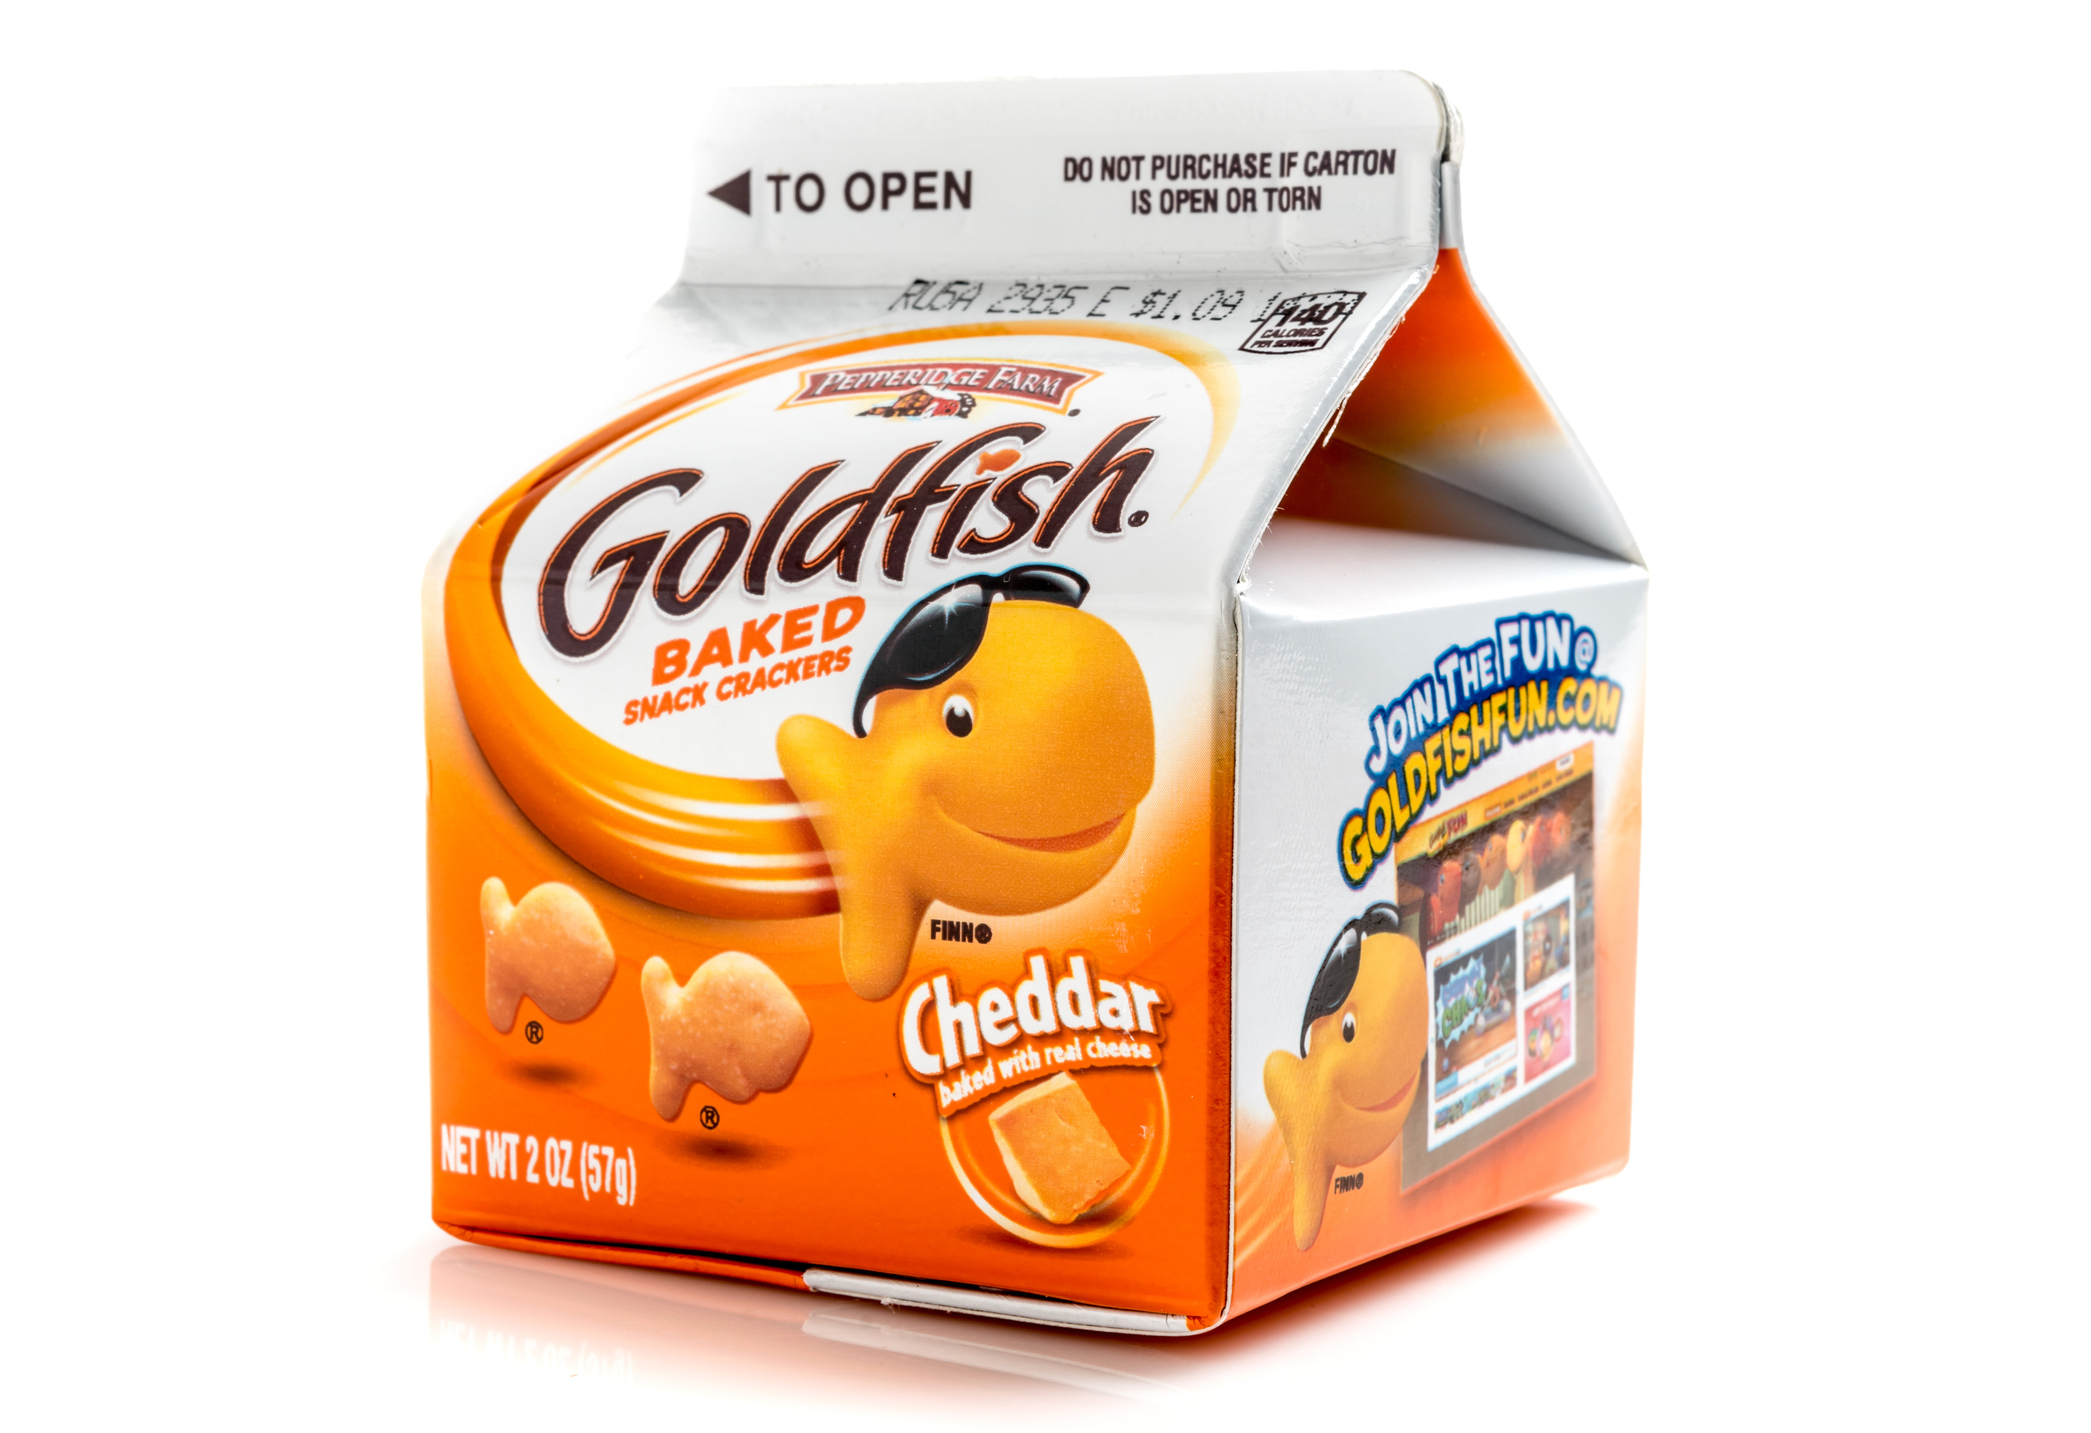 Carton Container of Pepperidge Fram Goldfish baked snack cheddar flavored crackers on white background.